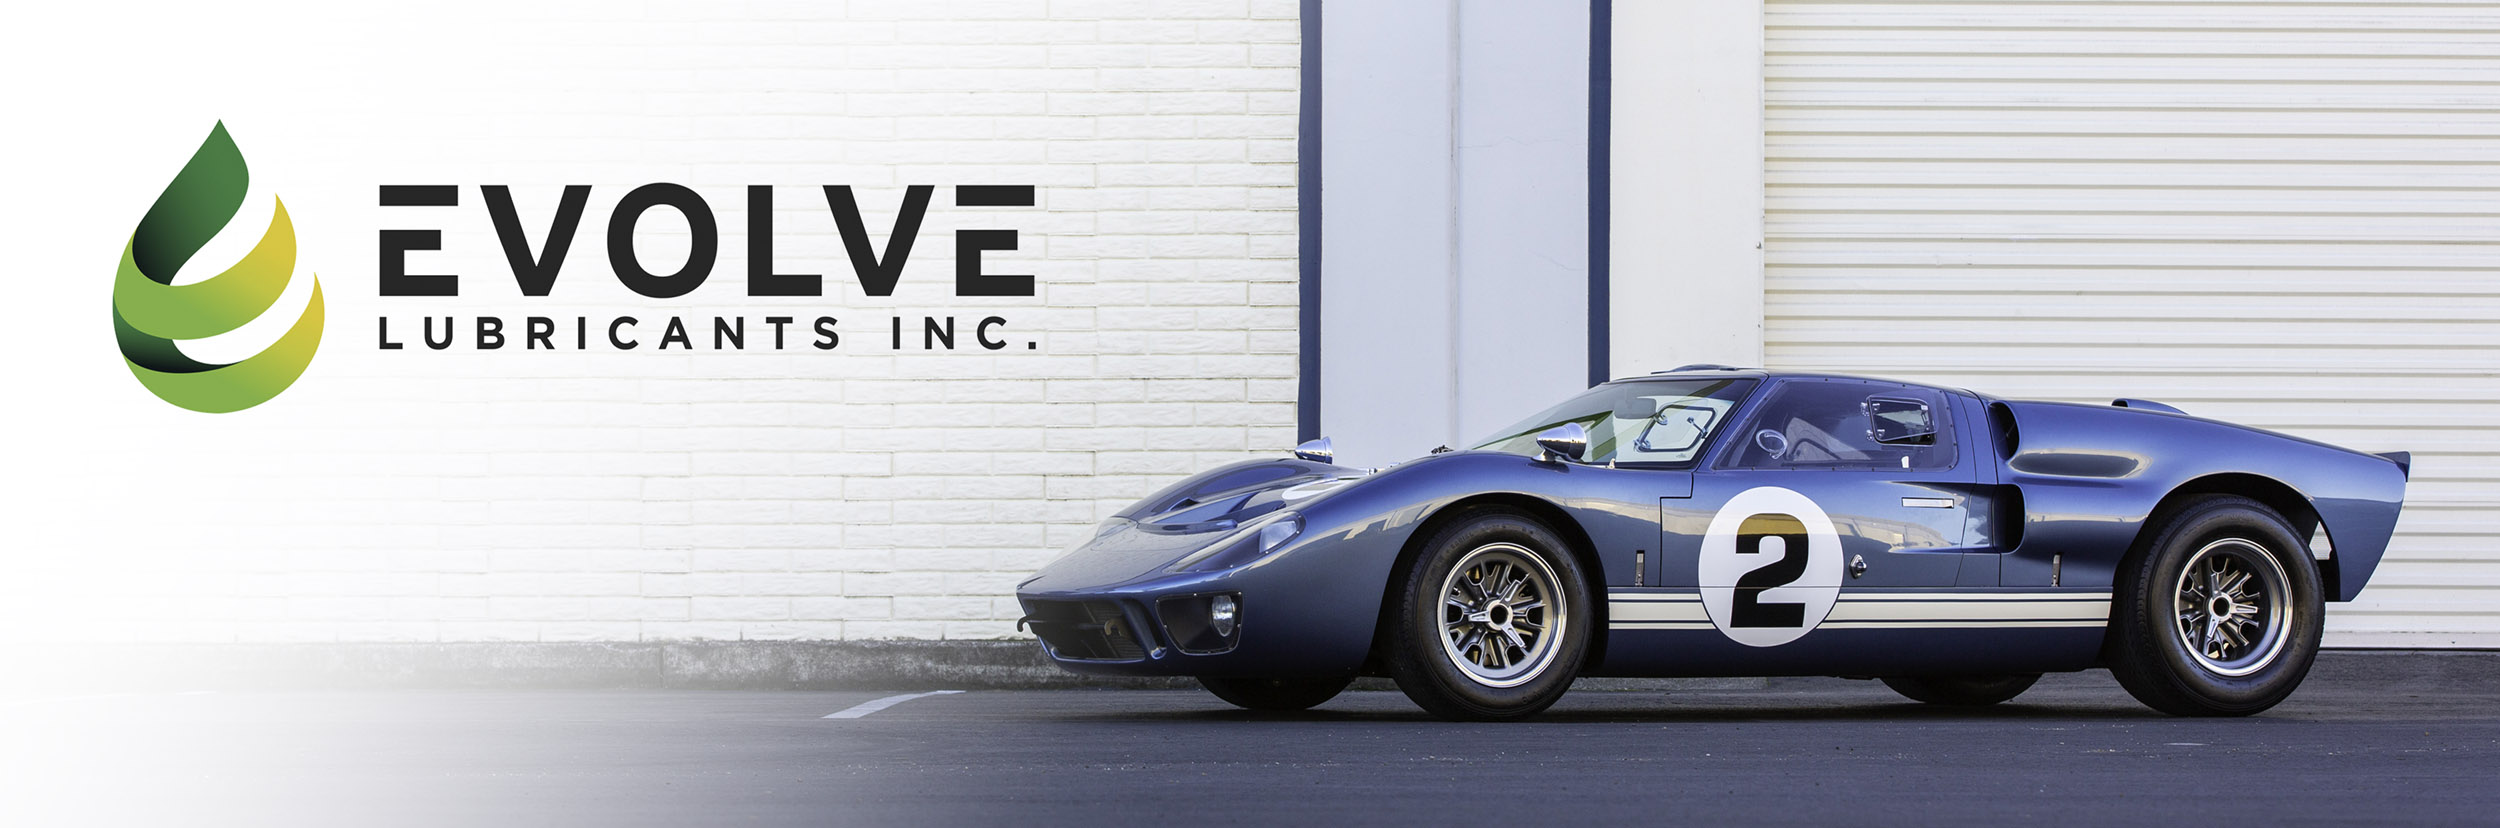 Evolve Lubricants Ford GT